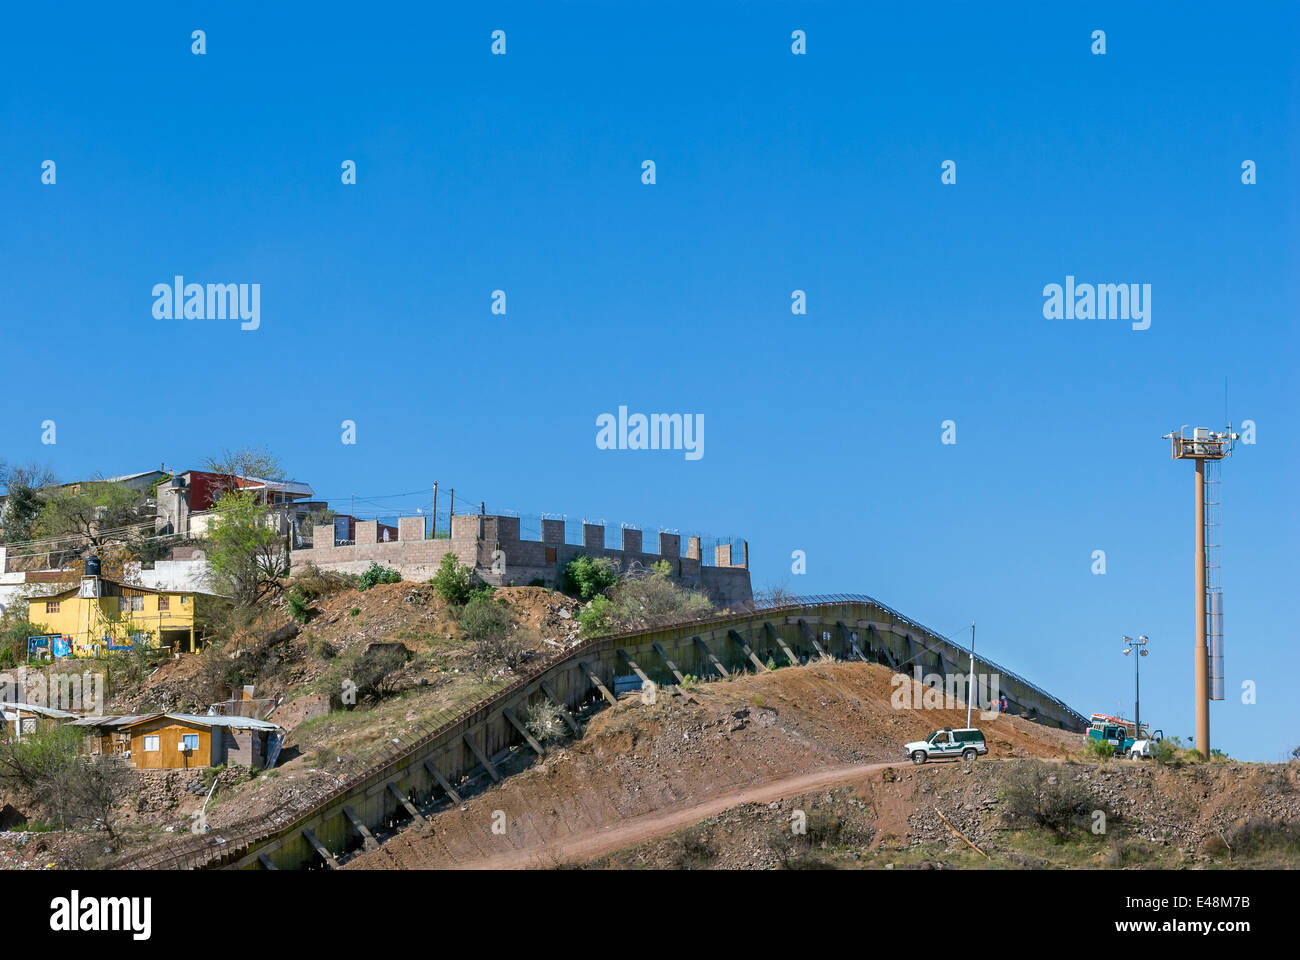 US border fence near downtown Nogales, Arizona USA, looking south into Nogales, Sonora, Mexico Stock Photo